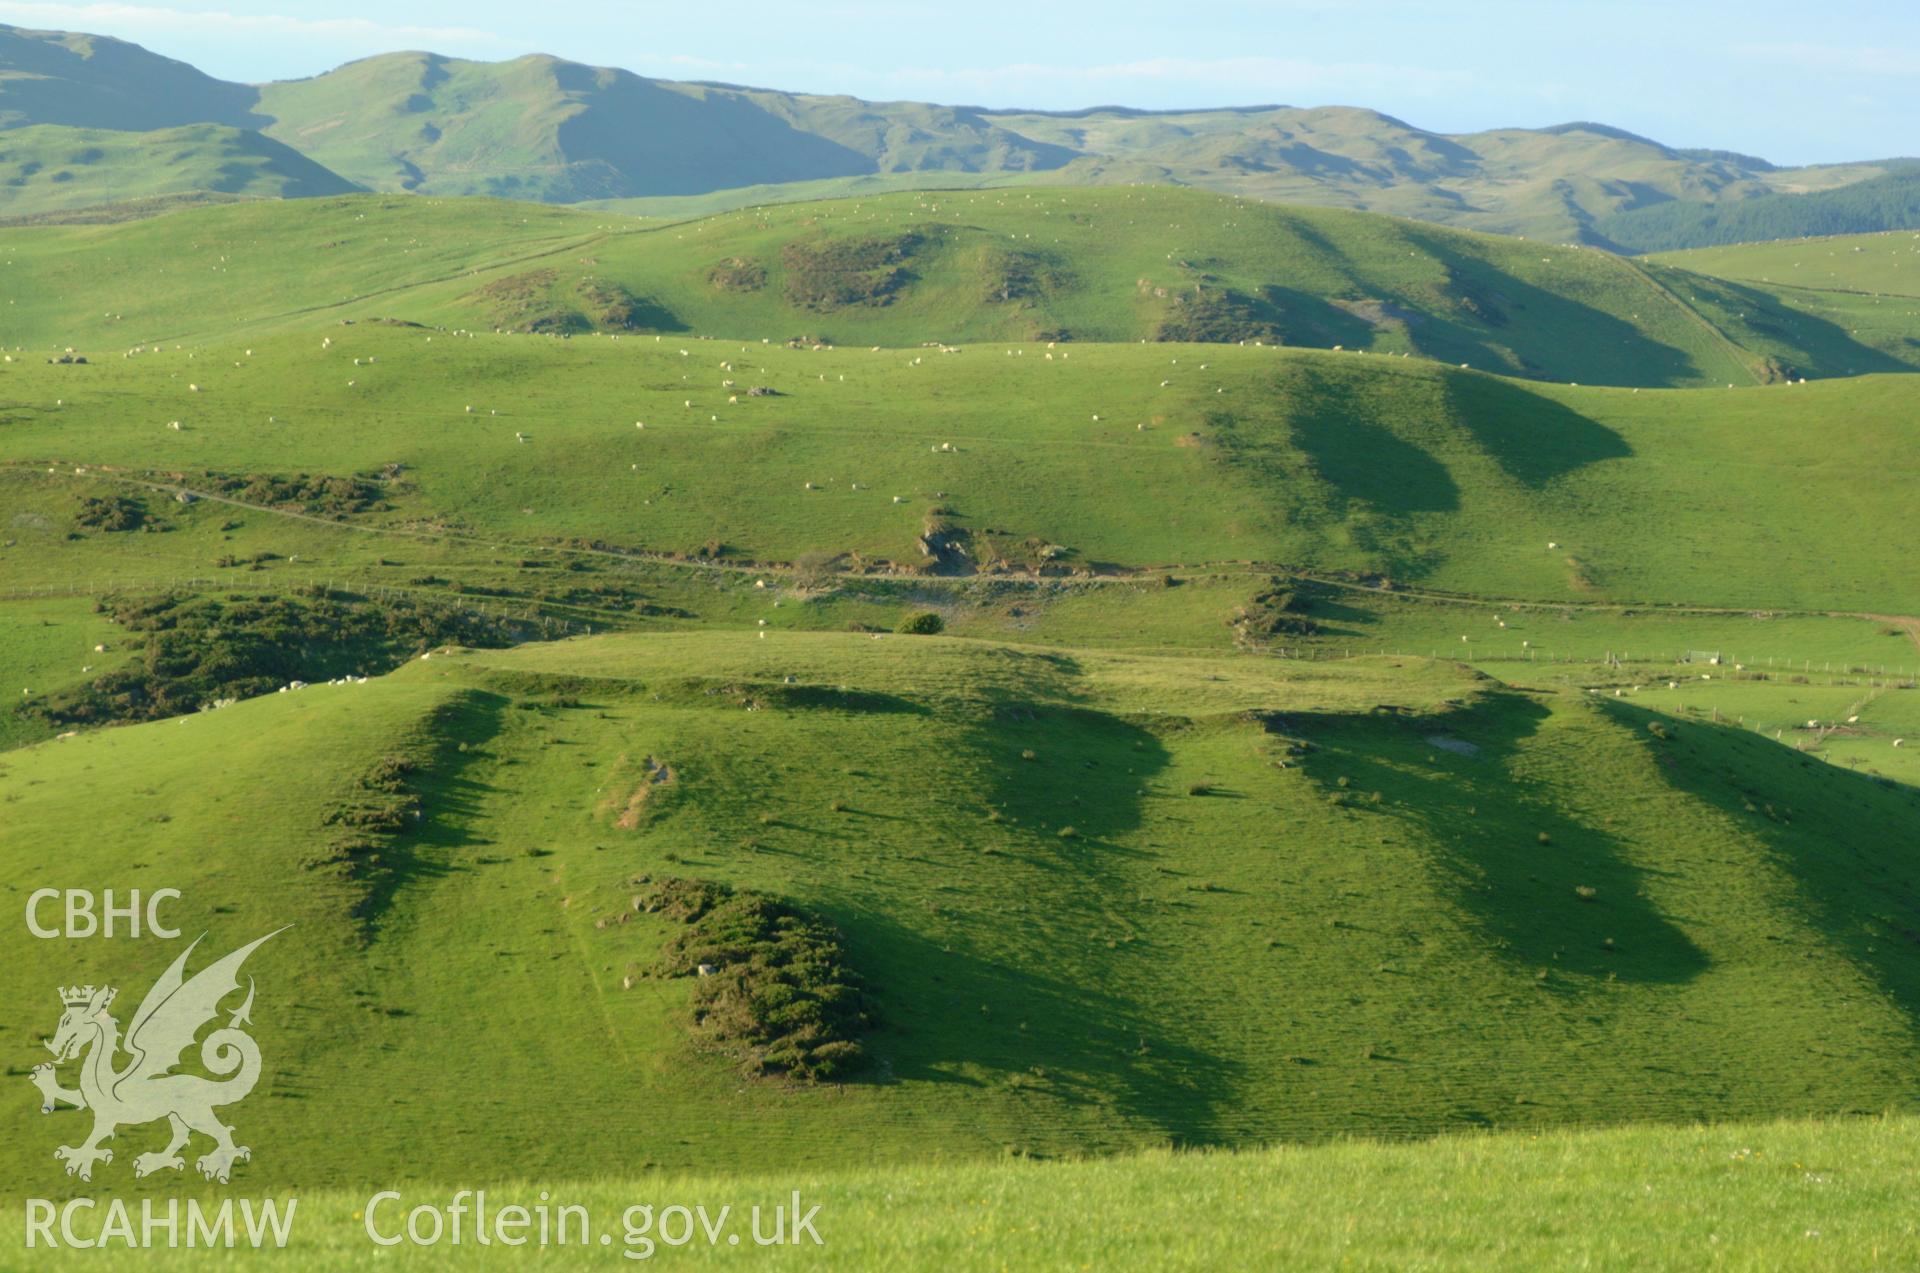 Pen y Castell hillfort, general view from south showing single rampart encircling hill.